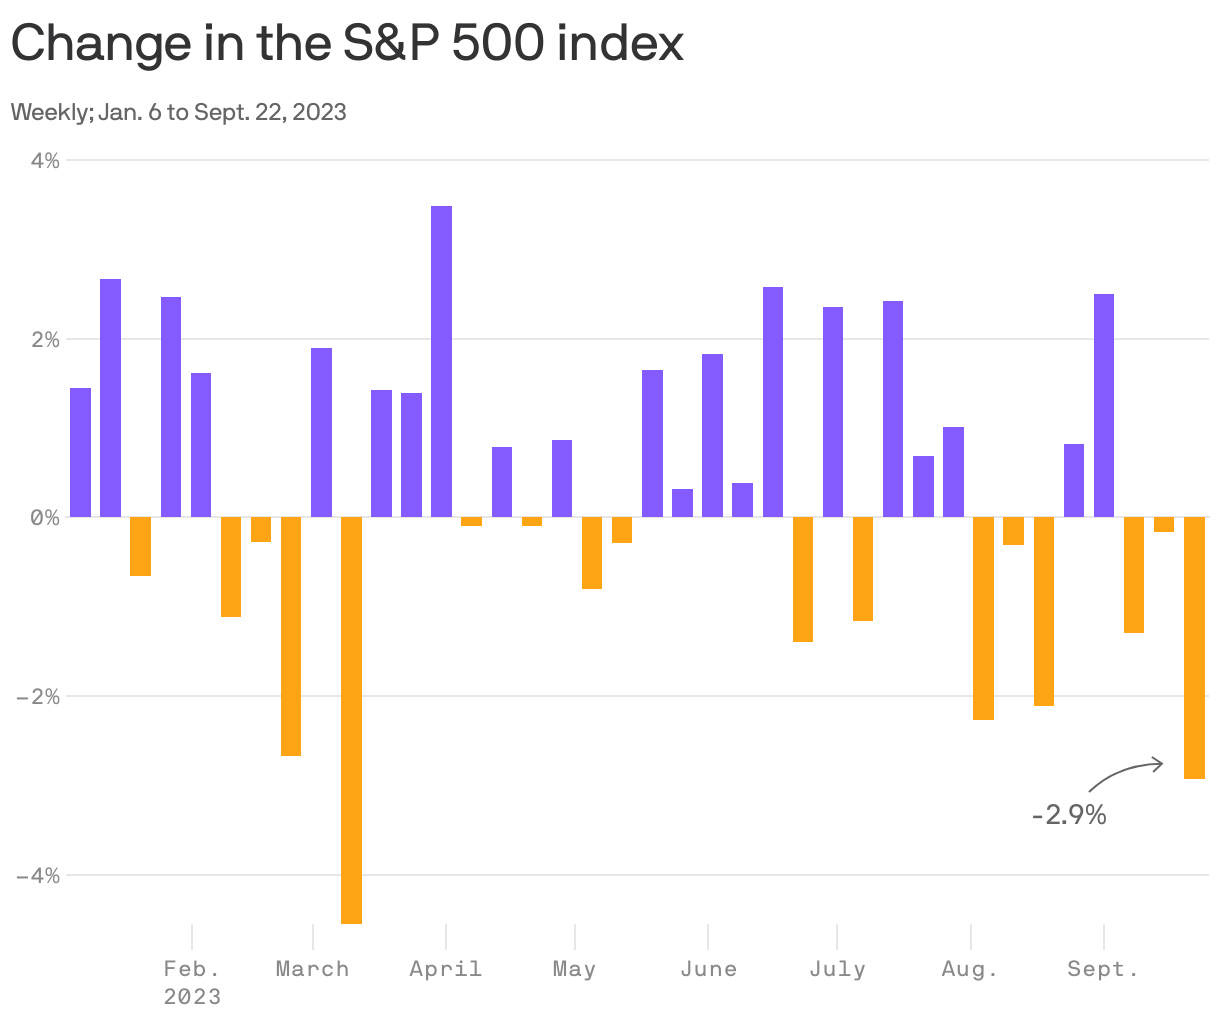 Change in the S&P 500 index